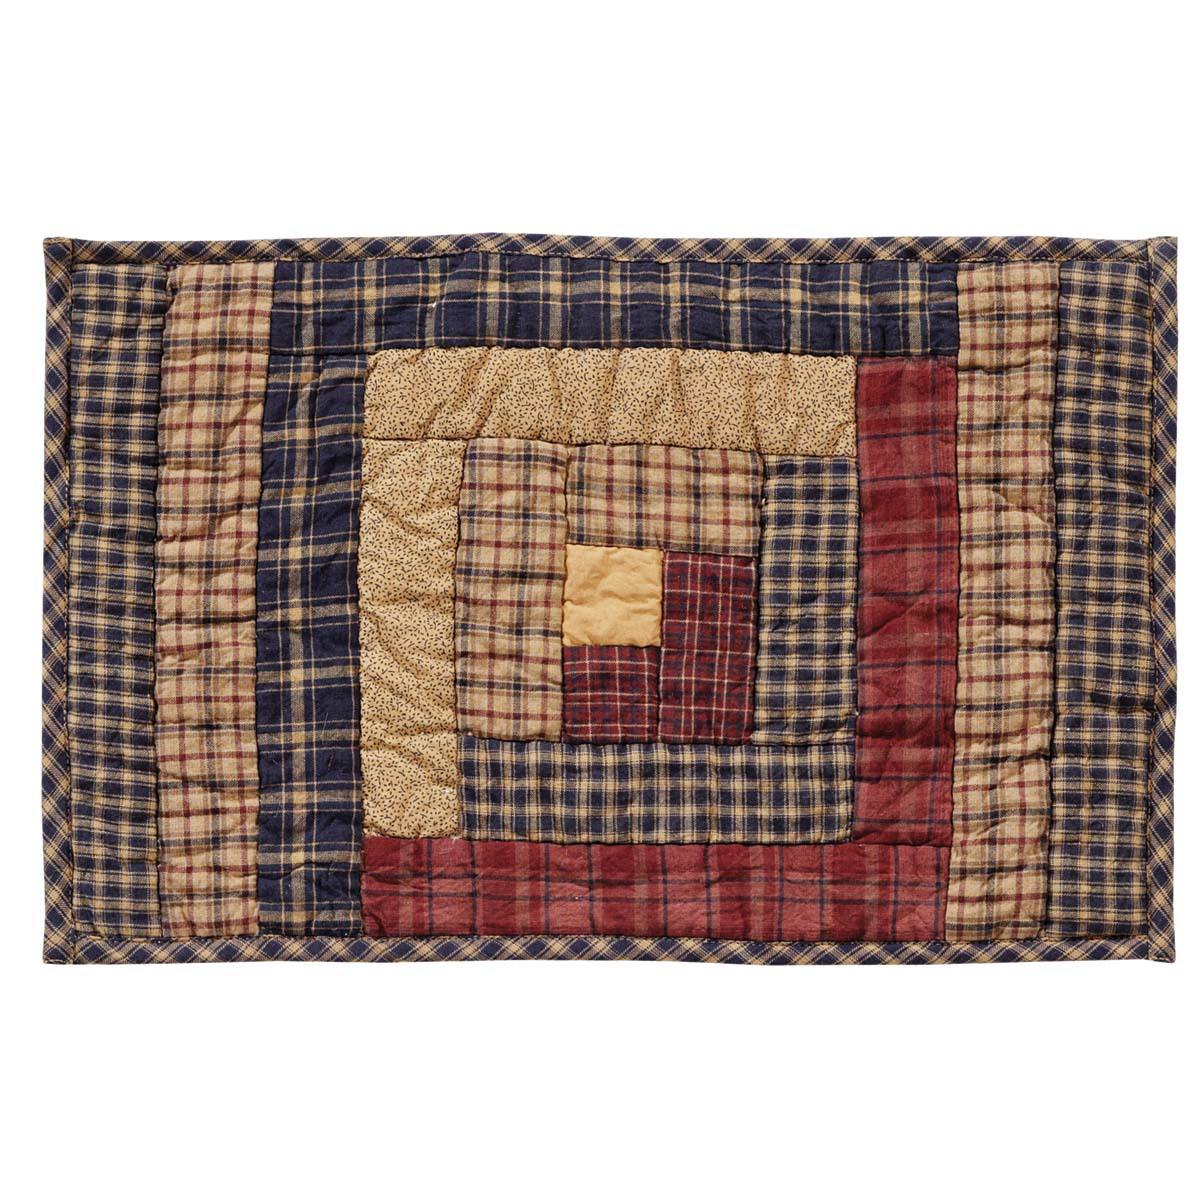 Millsboro Placemat Log Cabin Block Quilted Set of 6 VHC Brands - The Fox Decor